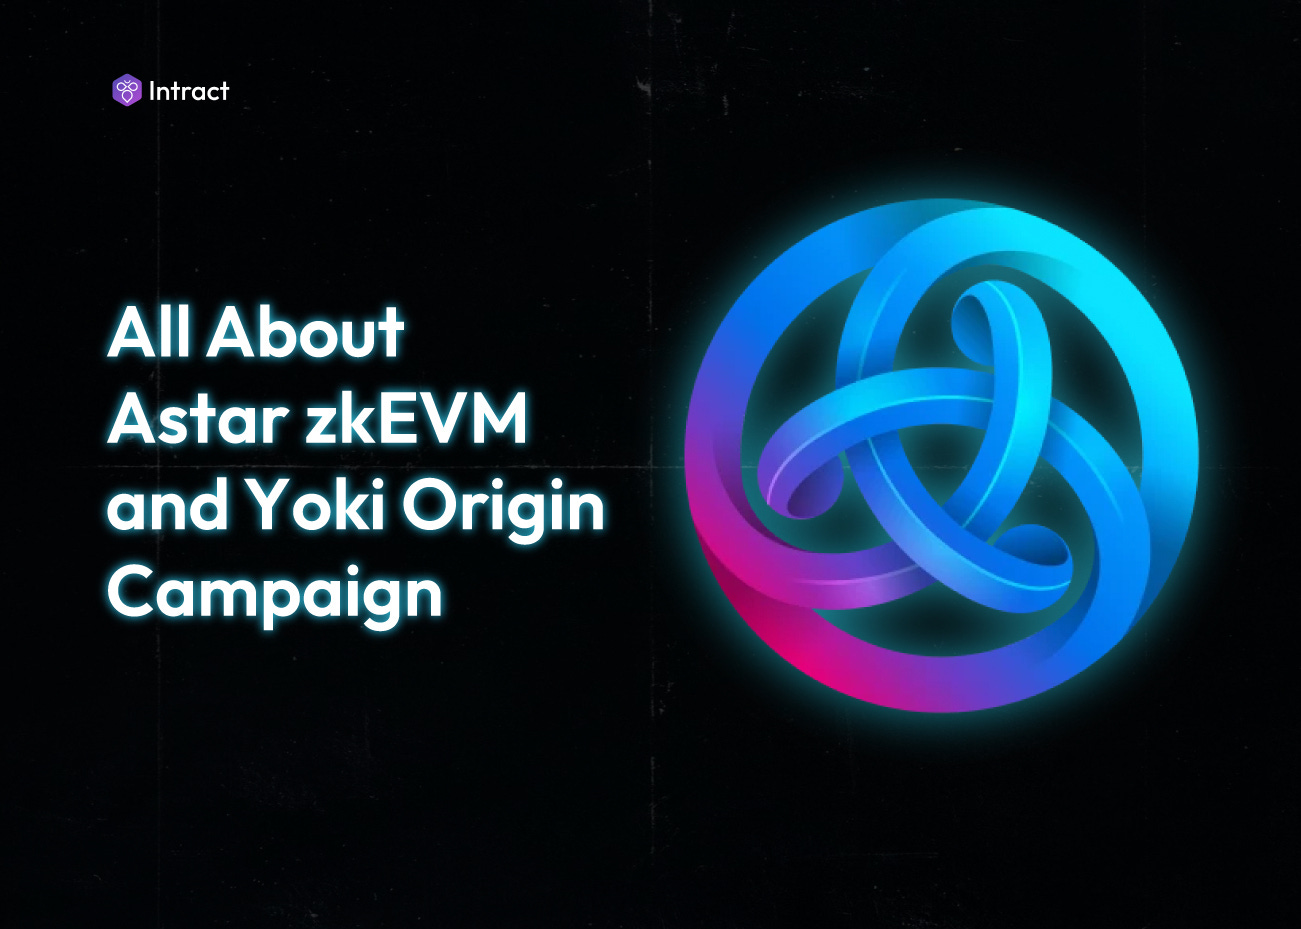 What is Astar zkEVM and Yoki Origin Campaign